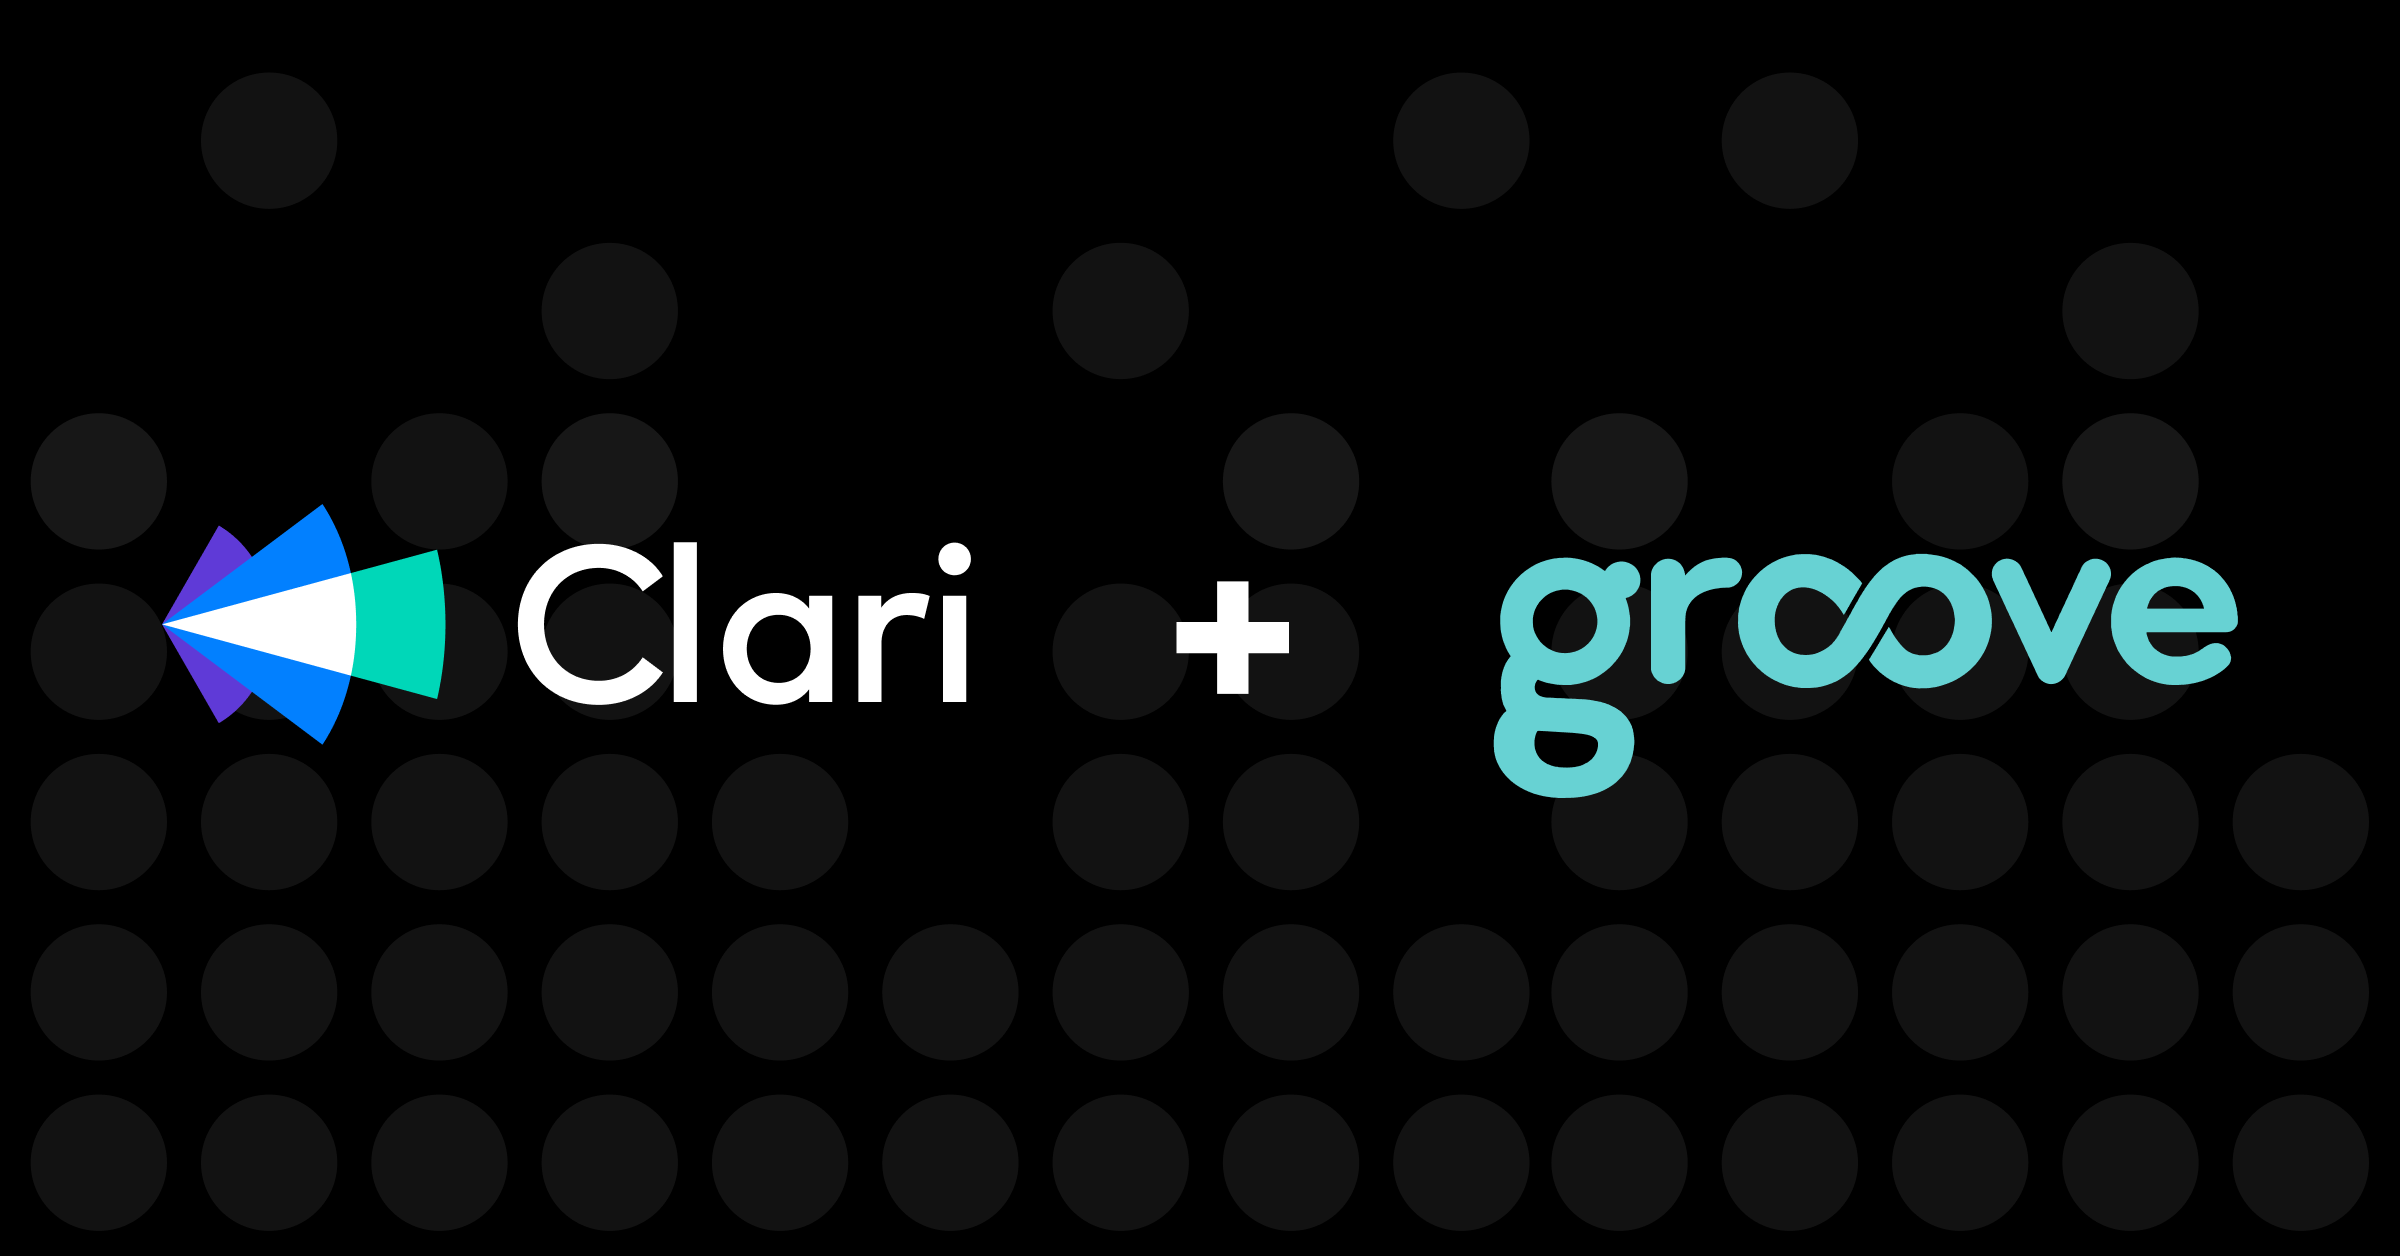 Clari and Groove logos on a black background